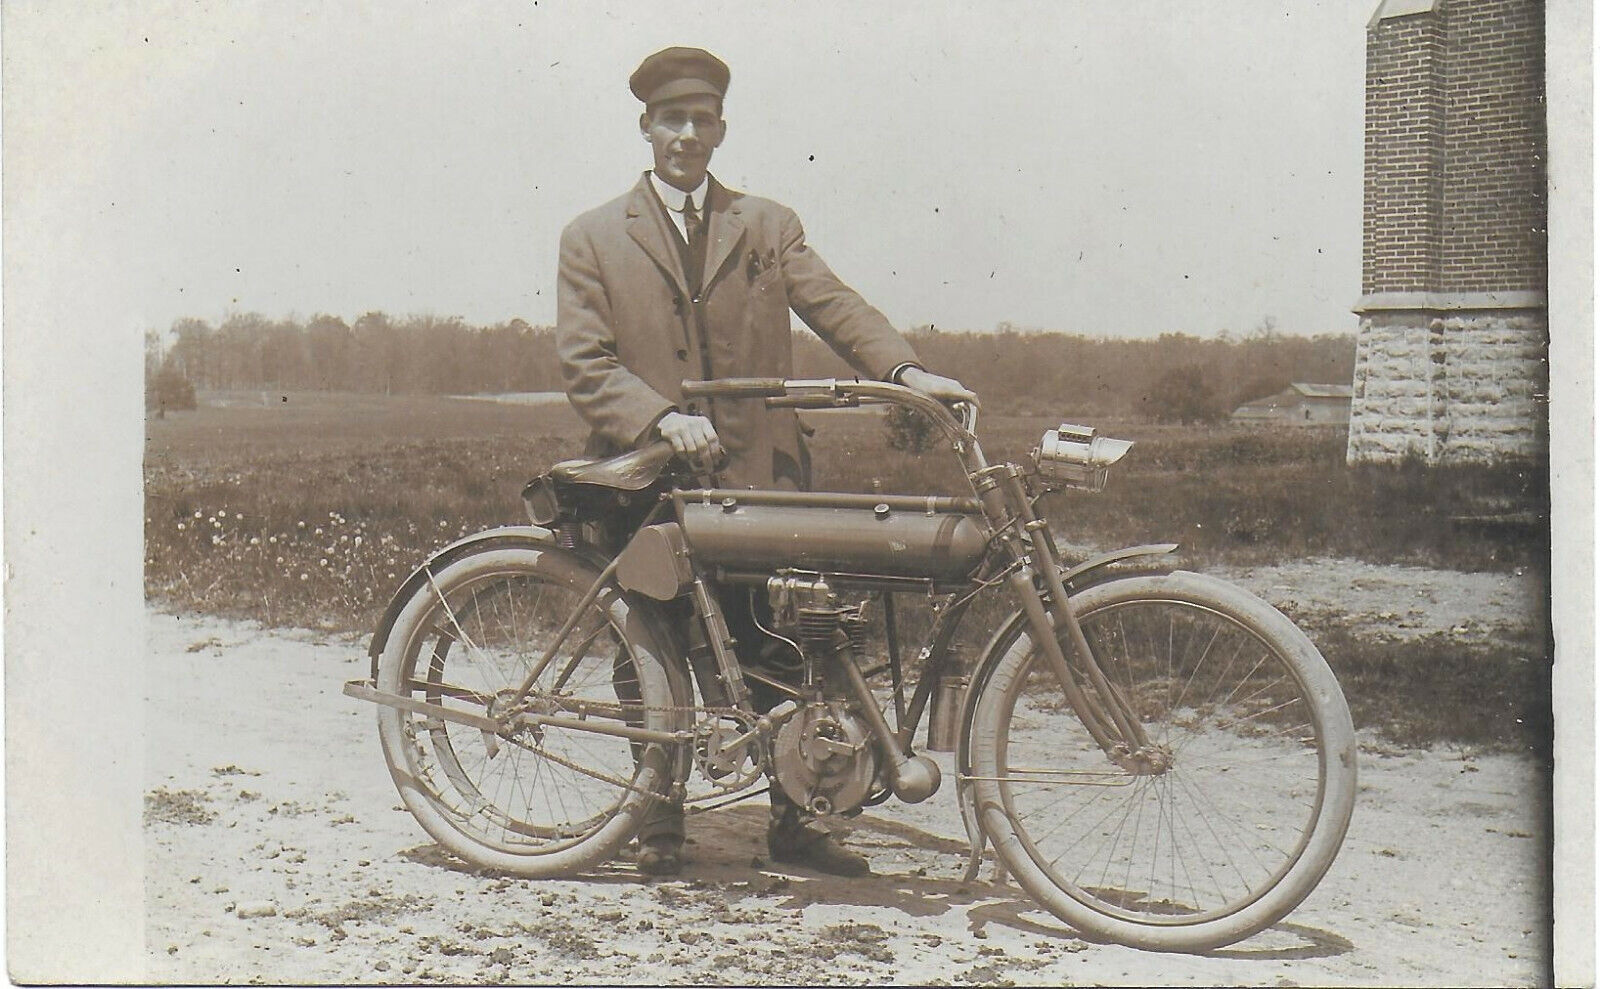 RPPC of Man Standing with Yale Motorcycle – Small Pennant Logo on Tank 1910-15